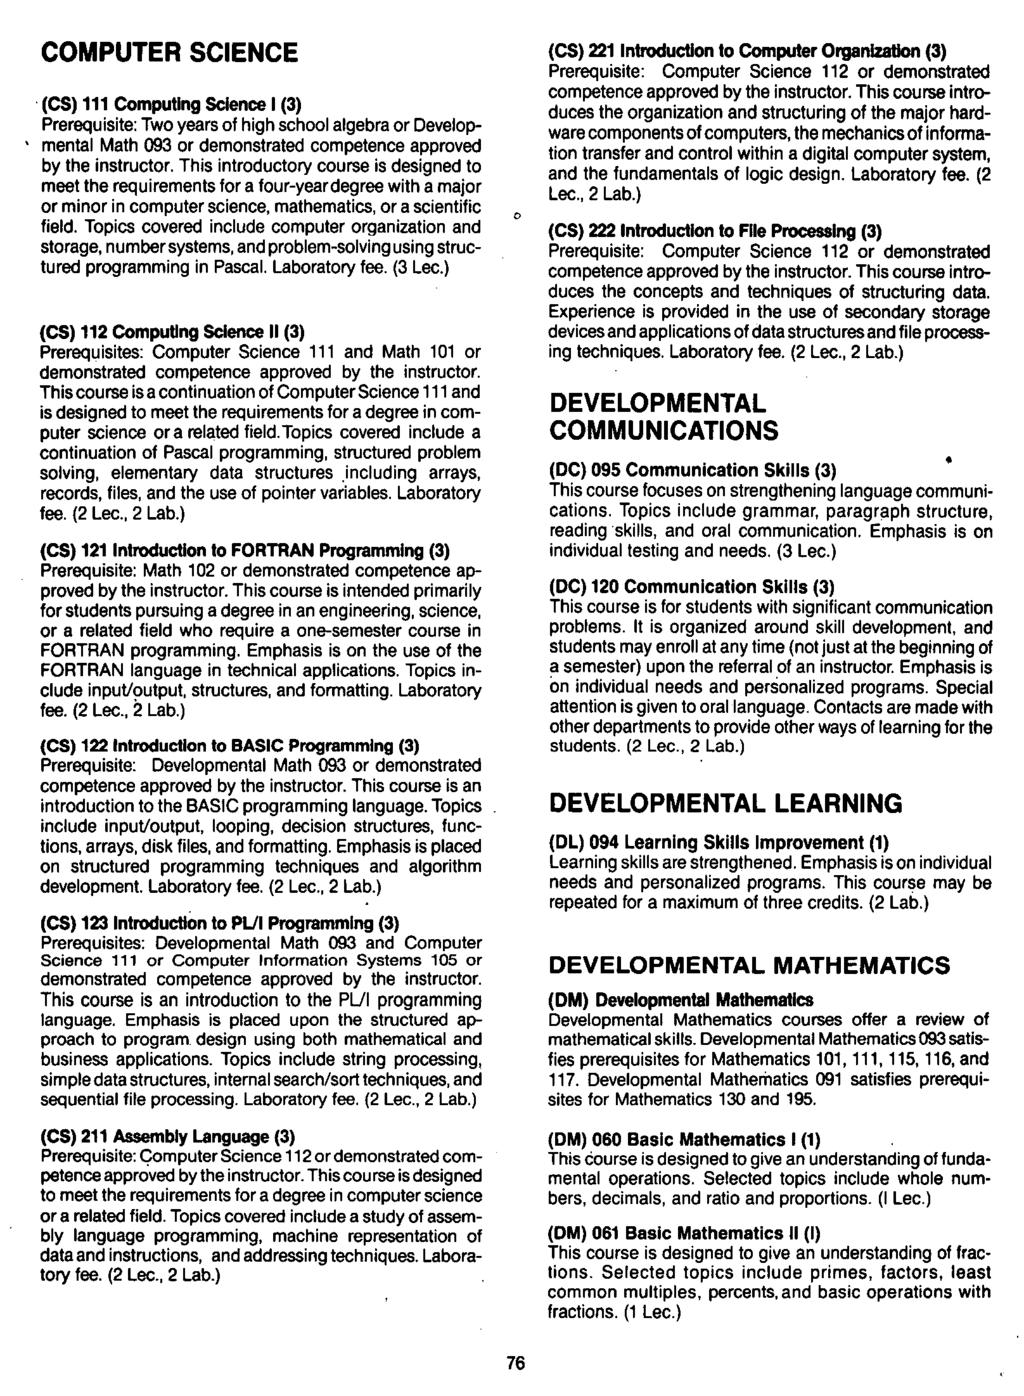 COMPUTER SCIENCE.(CS) 111 Computing SCIence I (3) Prerequisite: Two years of high school algebra or Developmental Math 093 or demonstrated competence approved by the instructor.